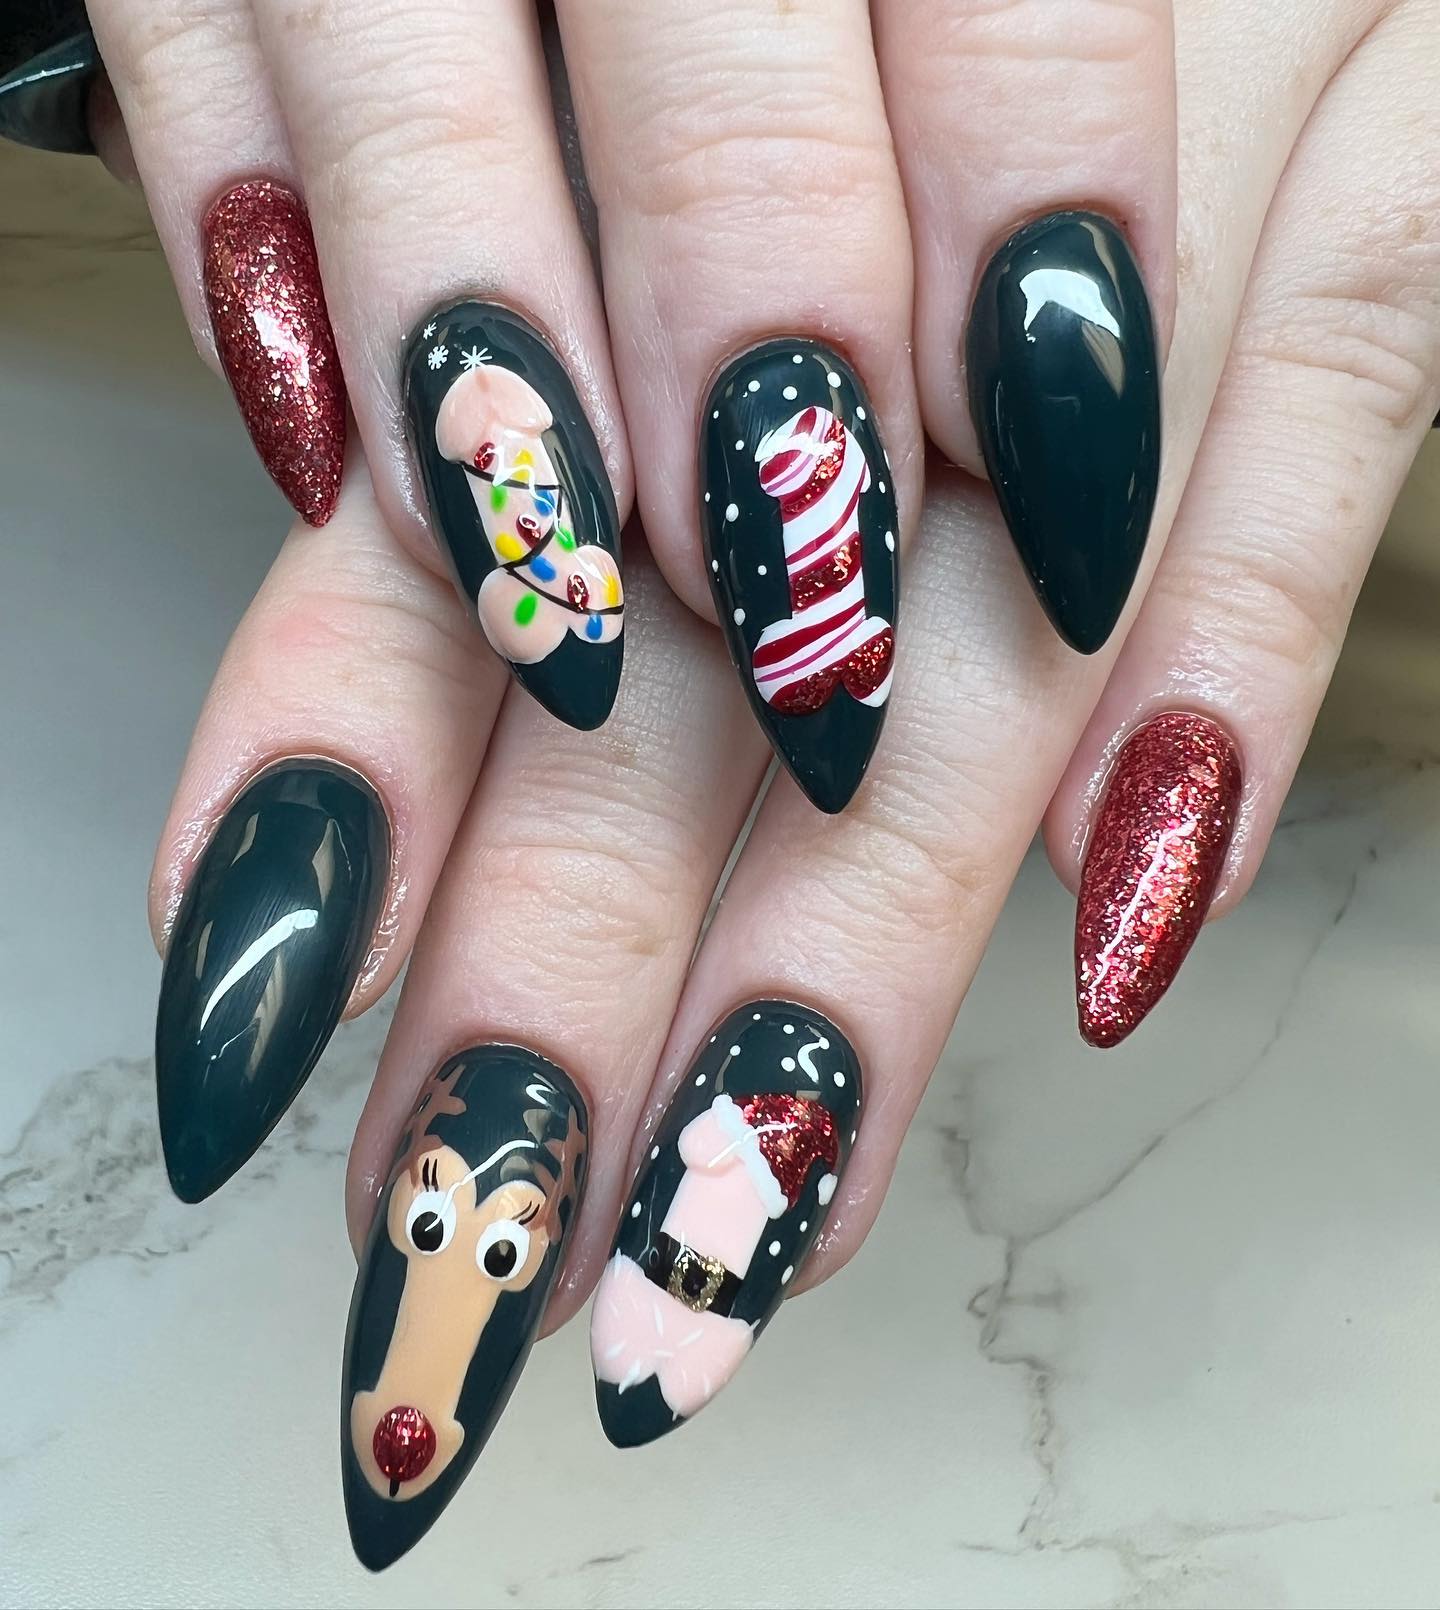 Are you ready to deck the balls? Christmas inspired penis nails will liven up your Christmas, for sure.